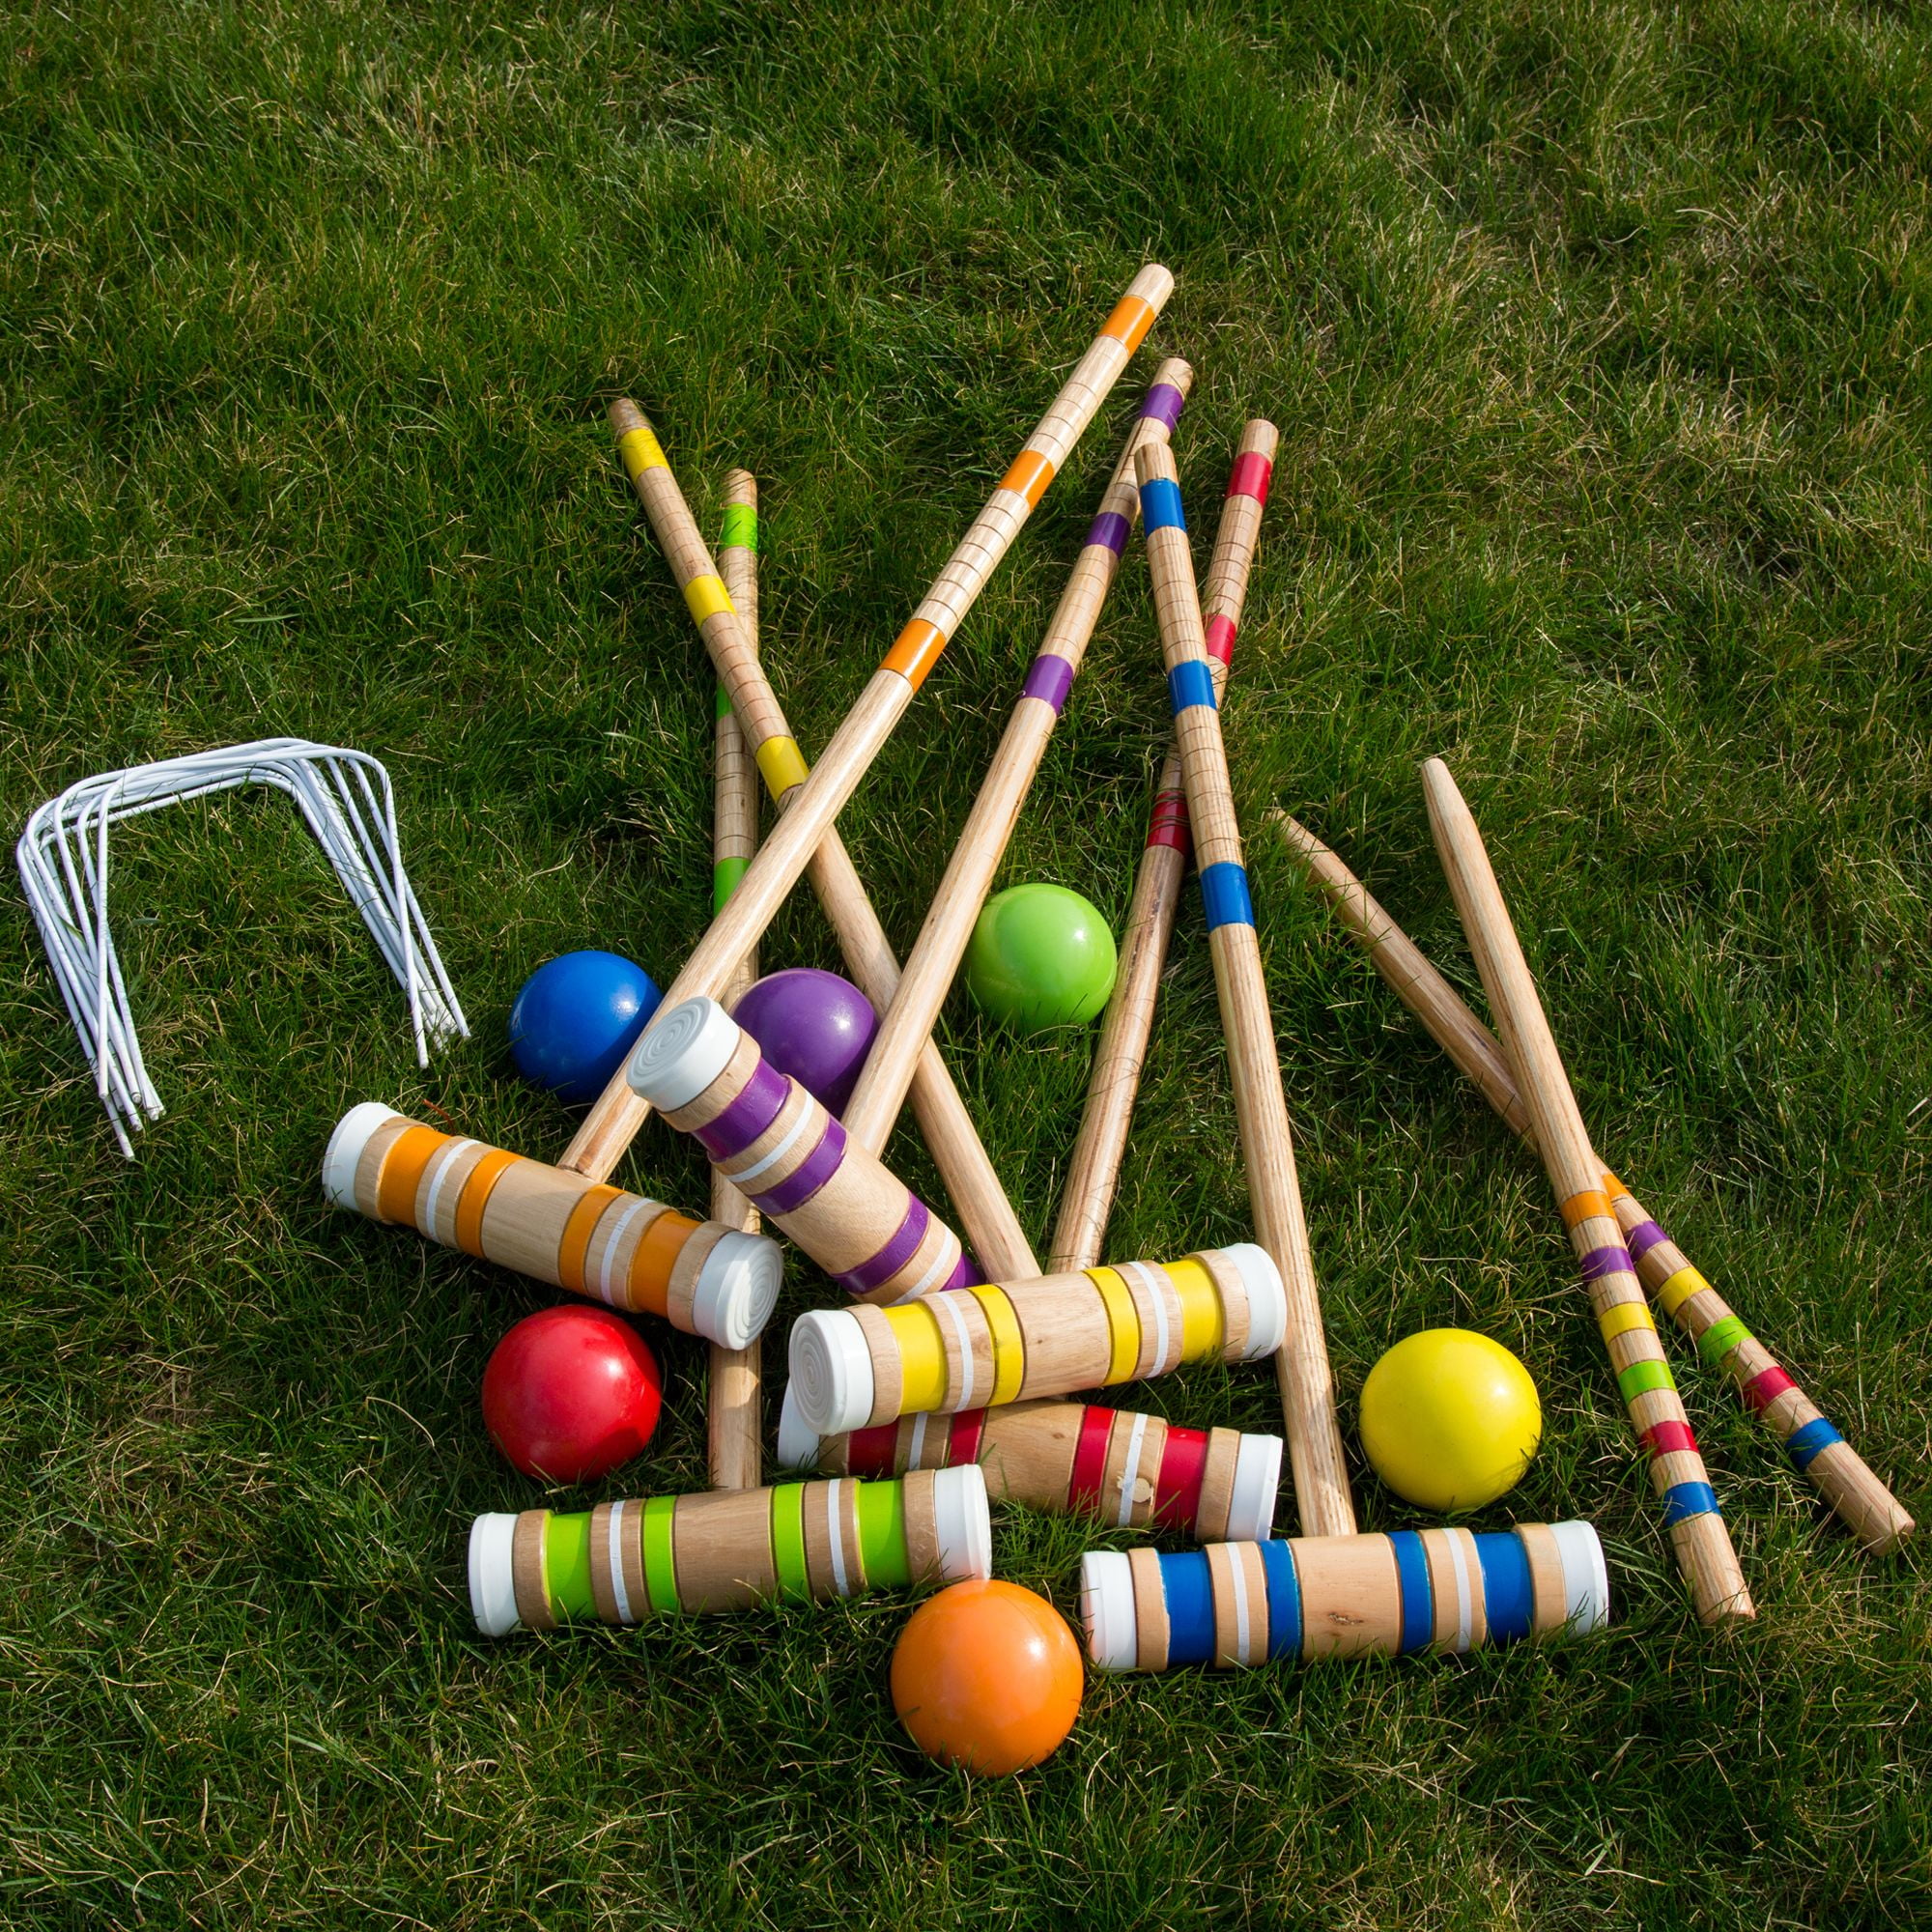 Details about   6-Player Croquet Lawn Game with Portable Caddy Perfect Game for Backyard Fun 